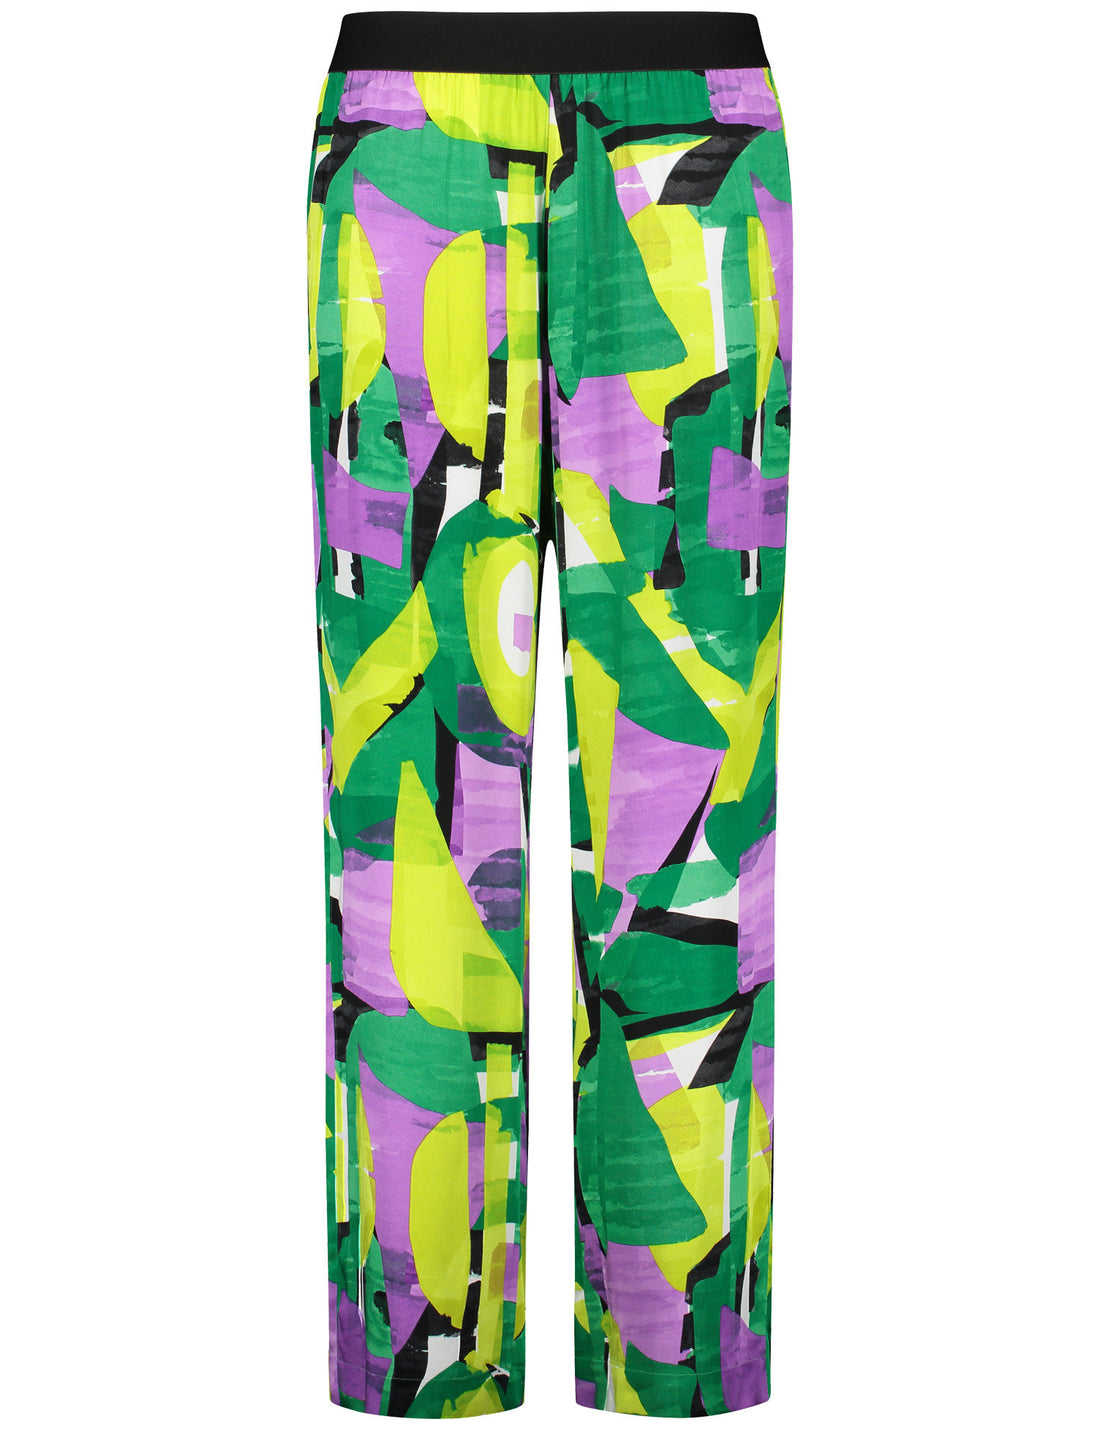 Palazzo Trousers With An All-Over Print_420028-21063_5602_01